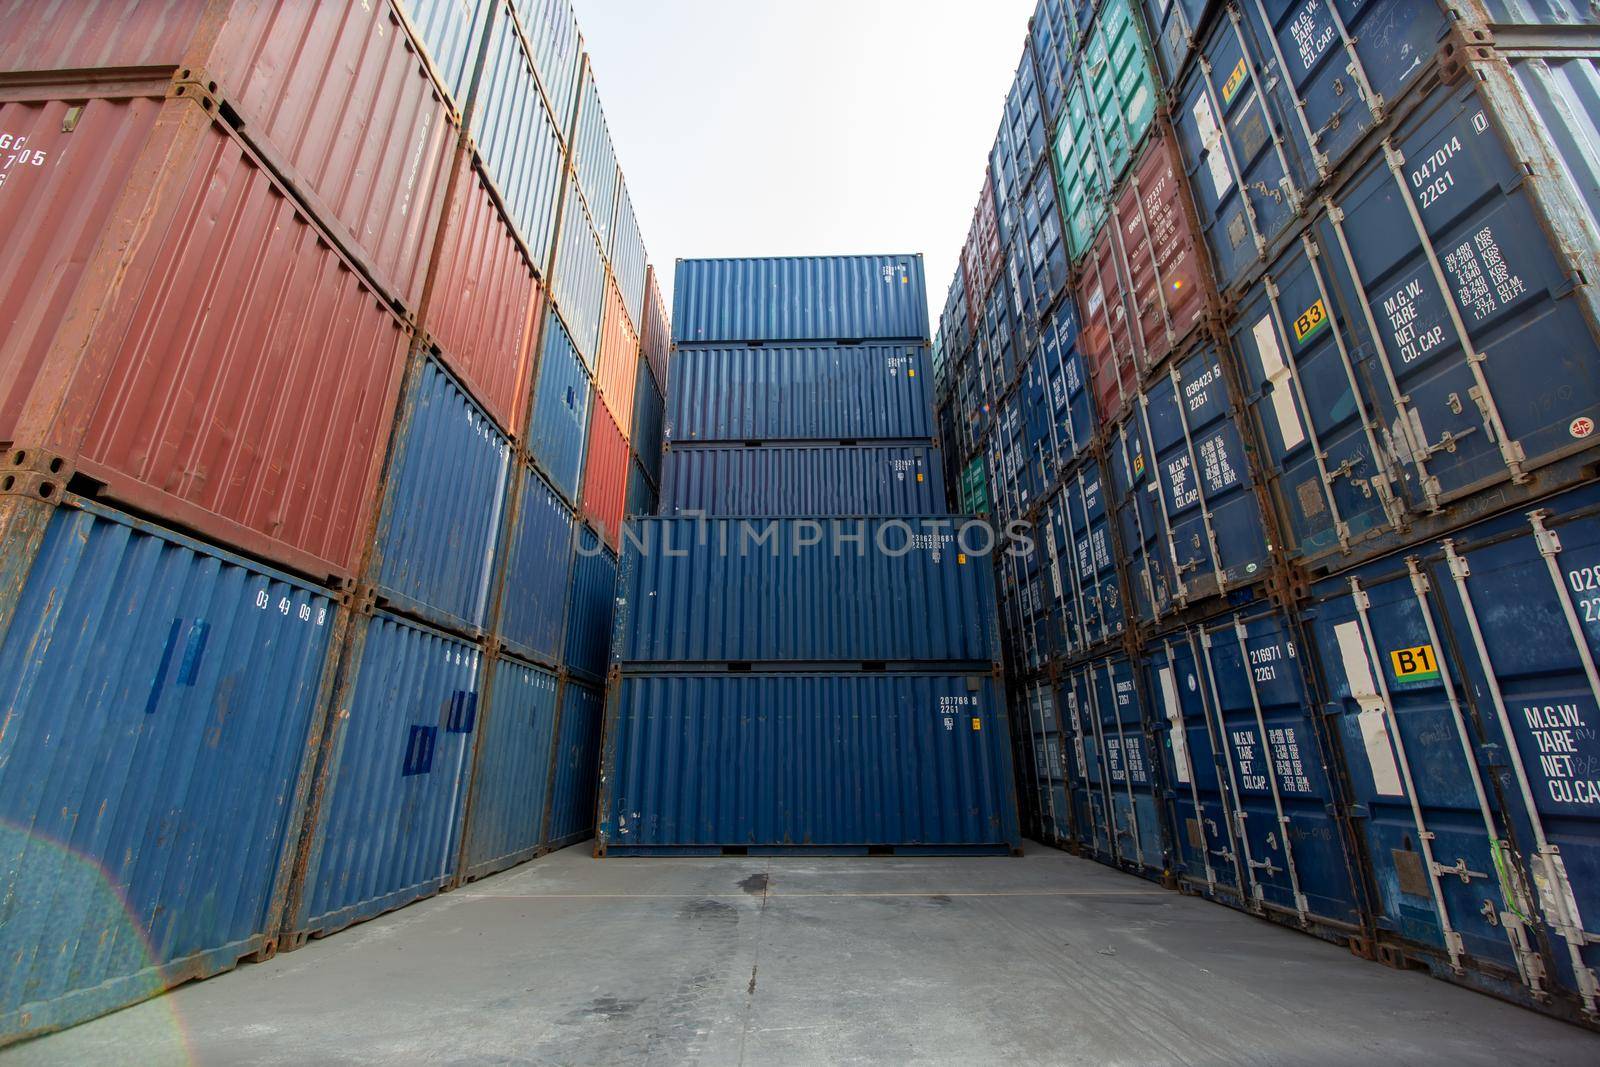 Containers box from Cargo at harbor.Foreman control Industrial Container Cargo freight ship at industry.Transportation and logistic concept.